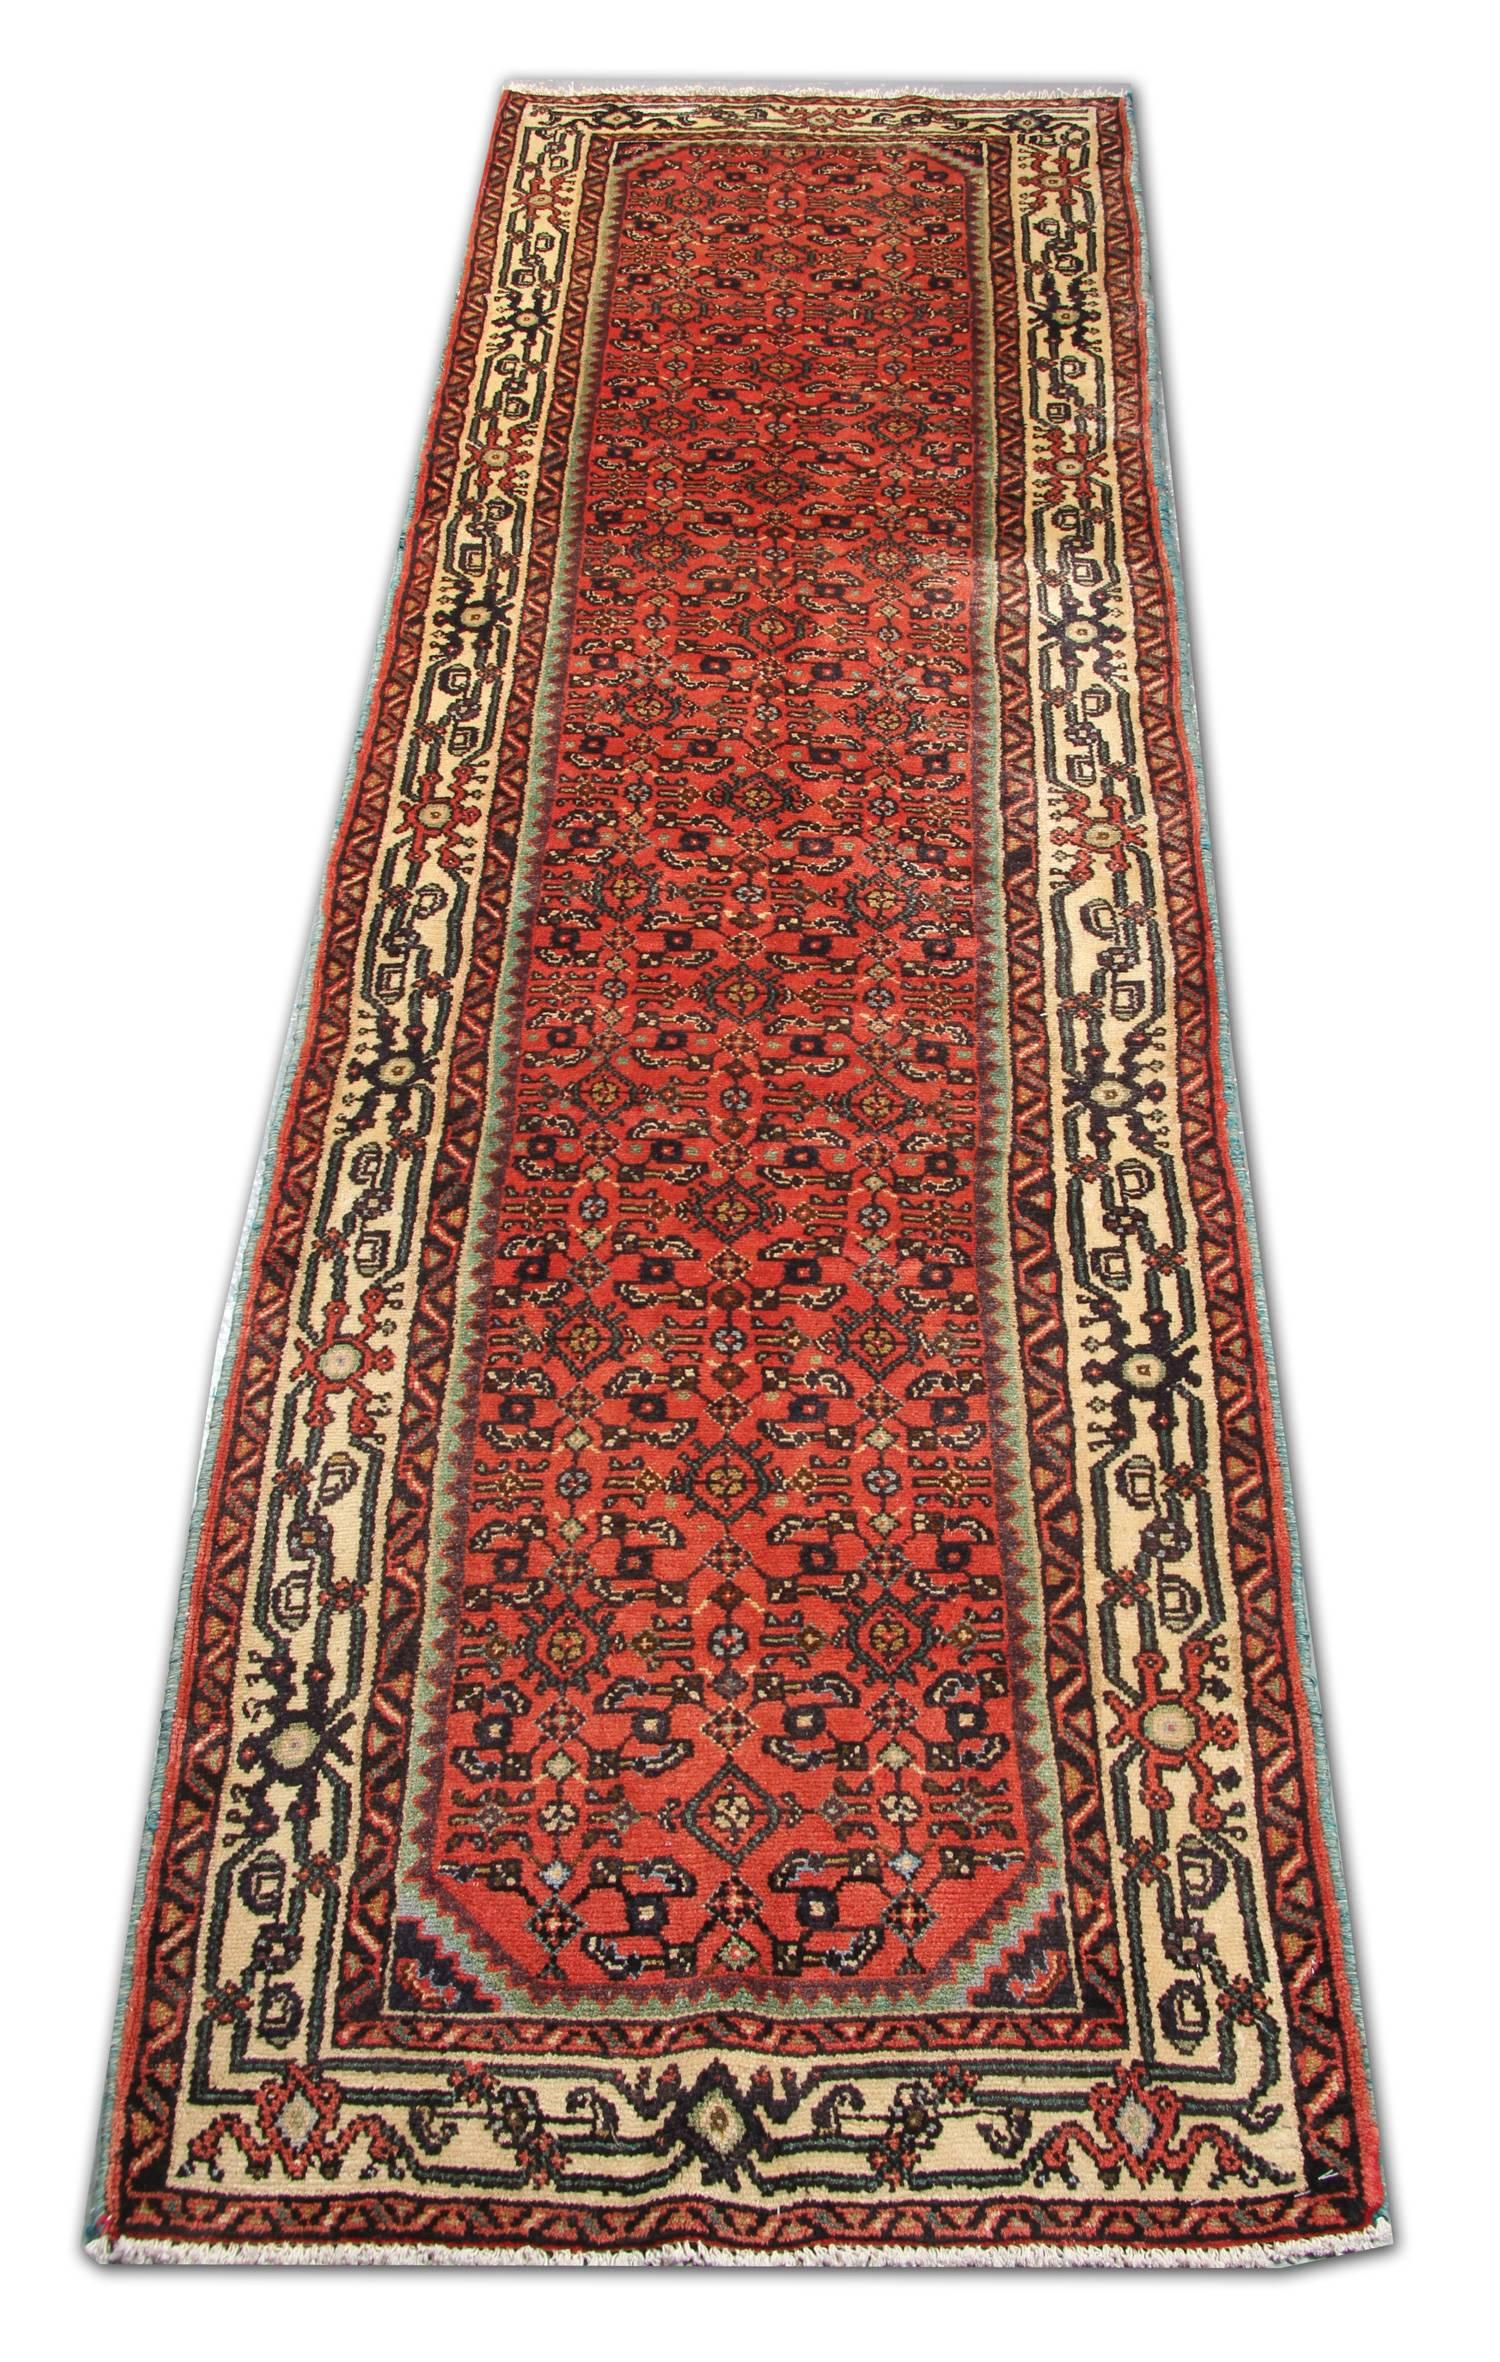 Earlier rugs and runners woven for the Persian market were traditionally long and narrow in accordance with local architectural norms. Such carpet weavings would have been utilized for affluent homes or for public reception halls. This colorful and